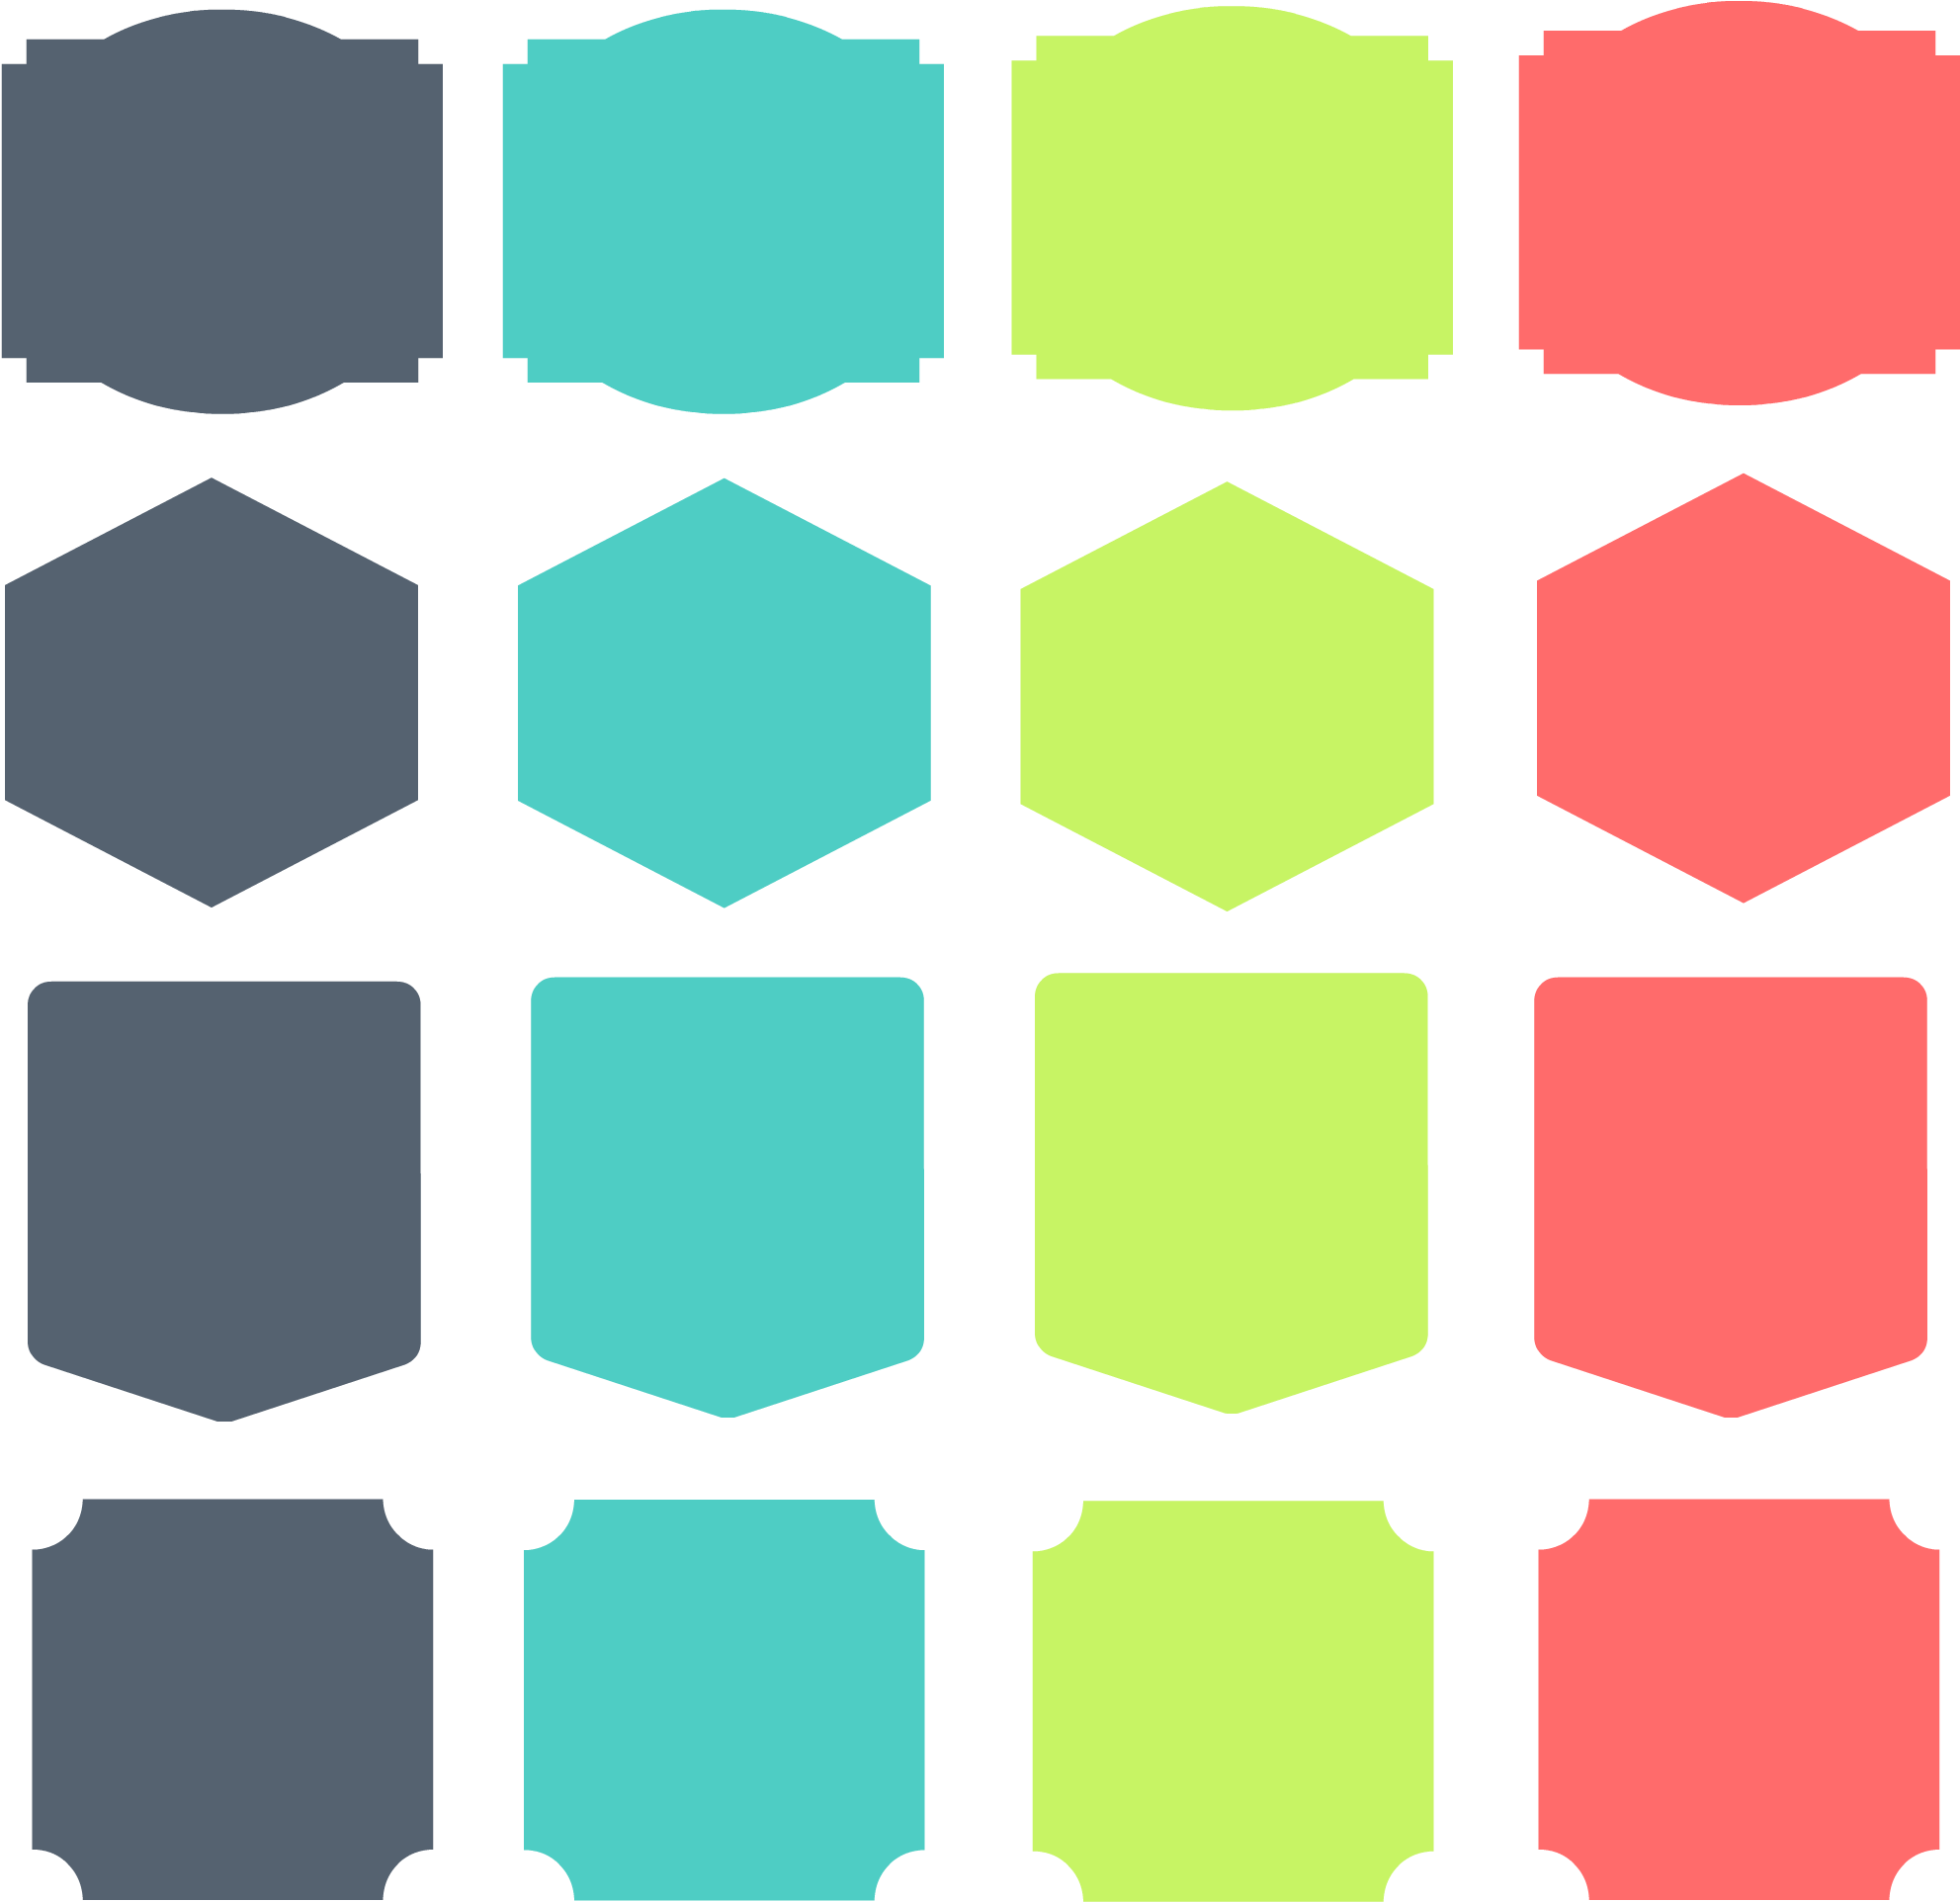 A Group Of Different Colored Shapes